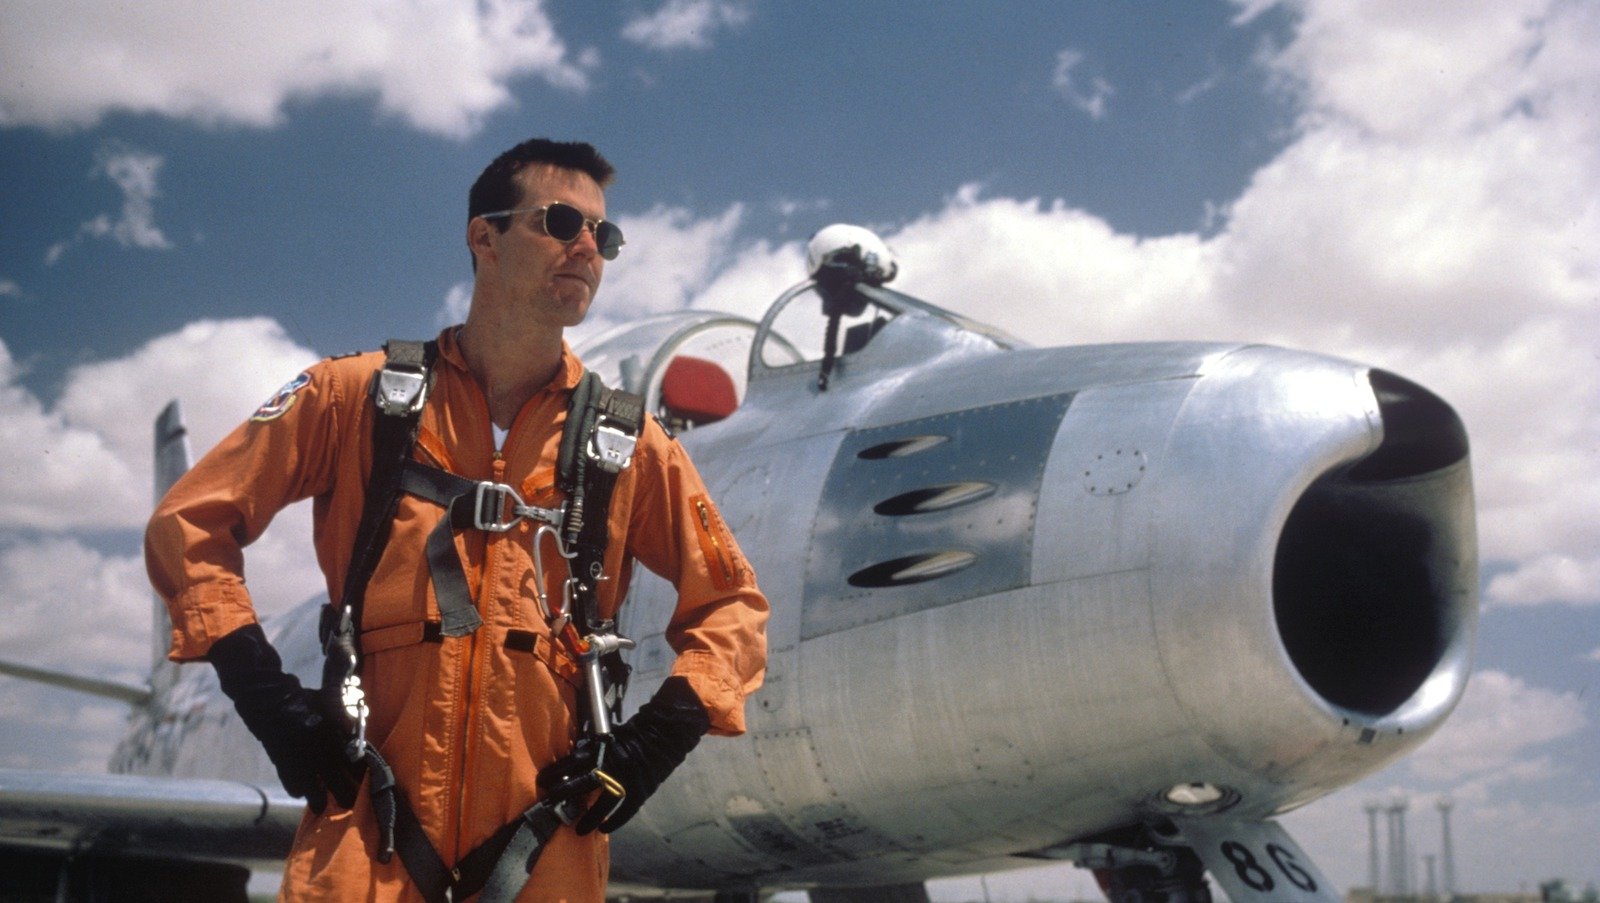 A test pilot in orange and aviator sunglasses standing in front of an airplane